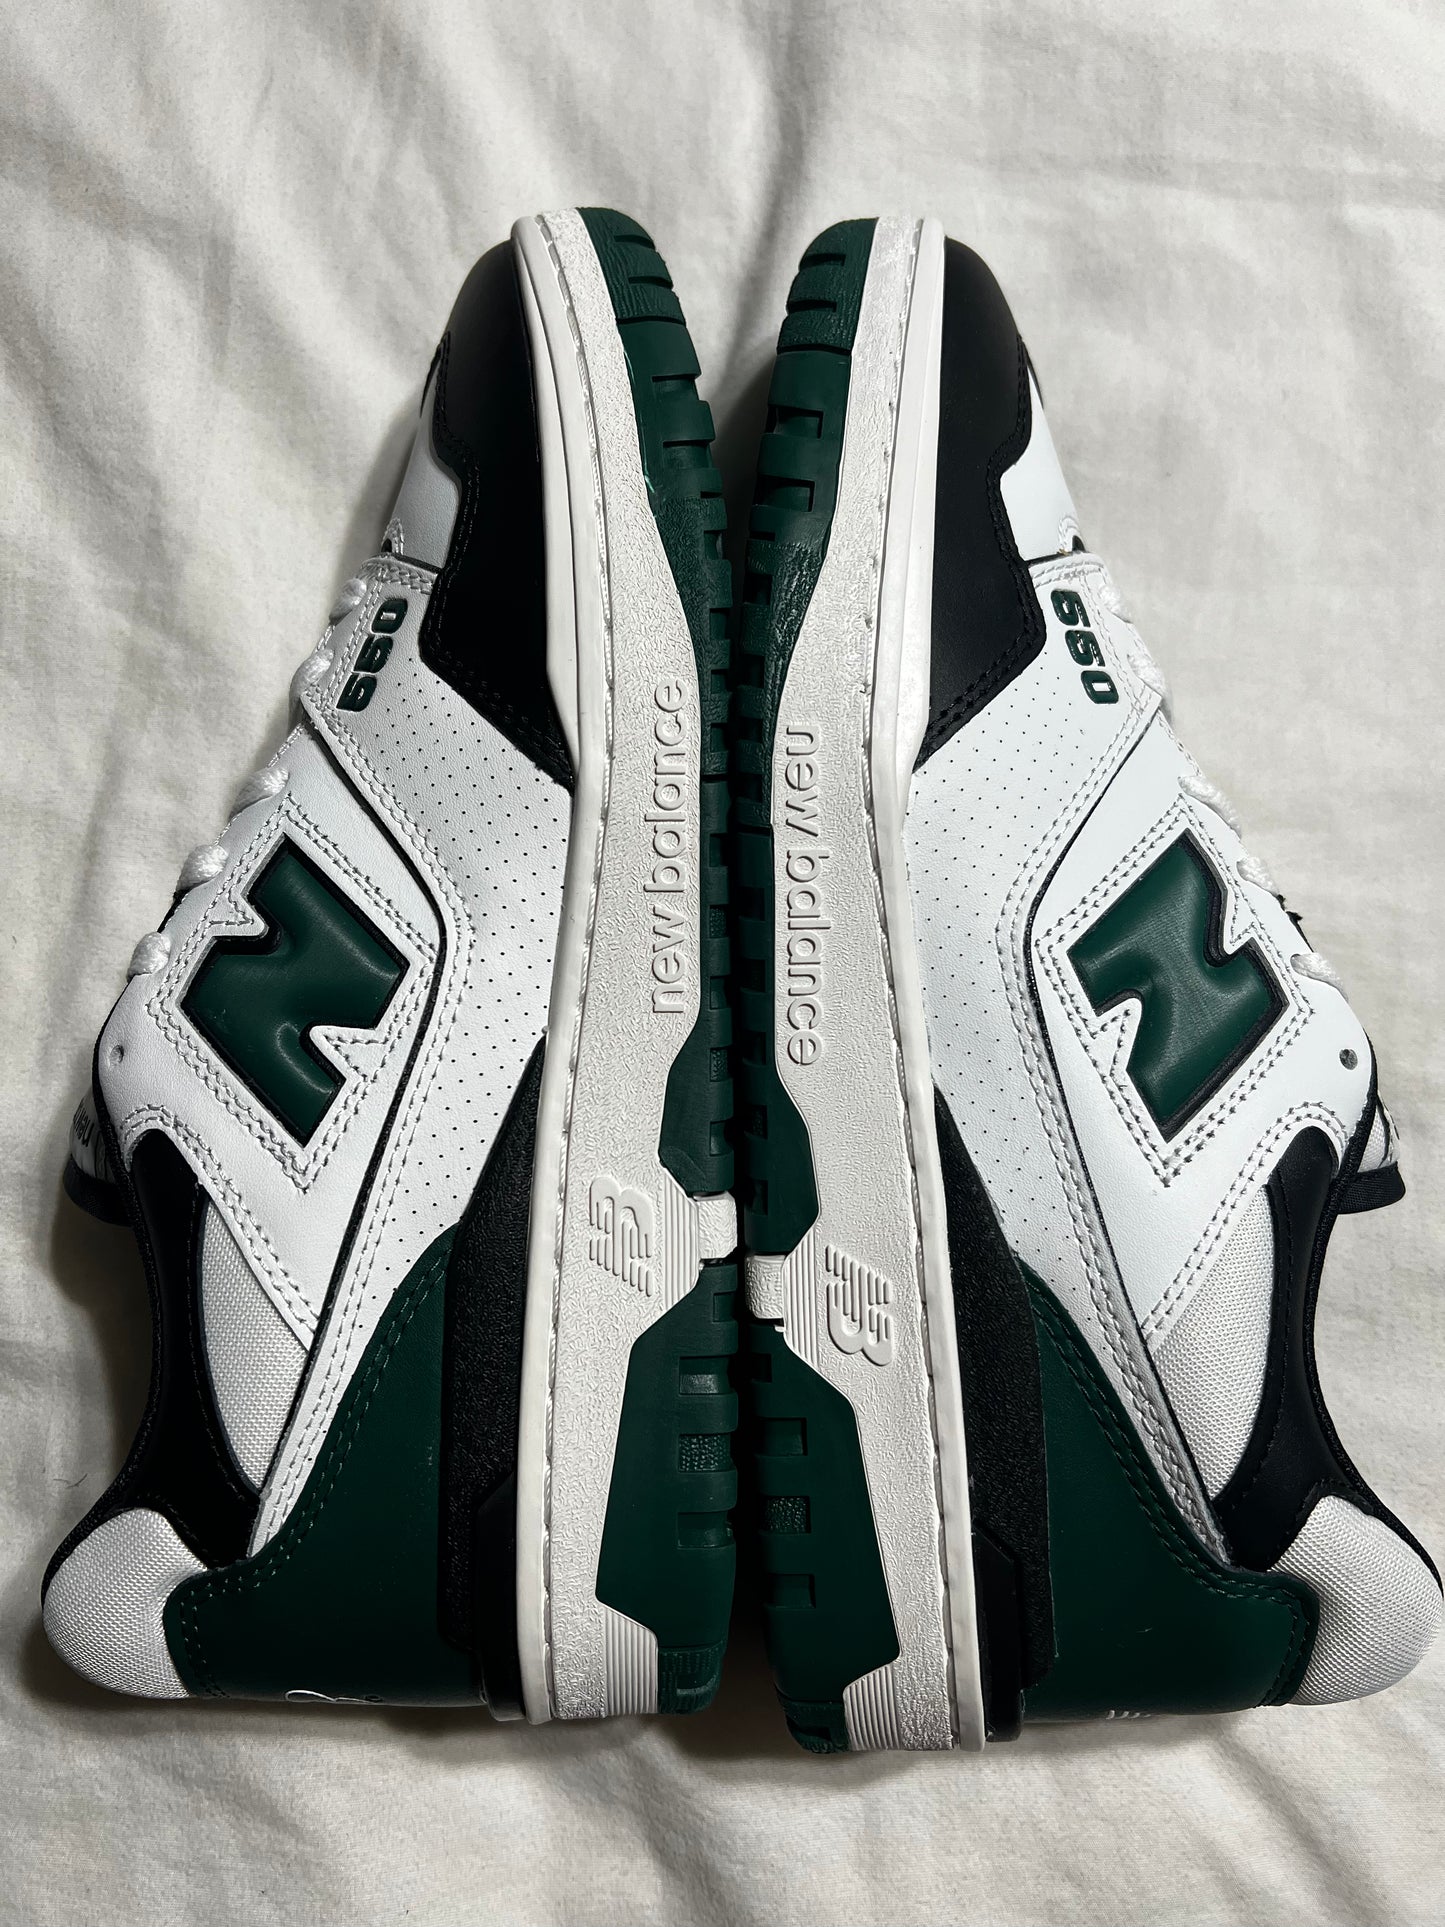 New Balance BB550 Shifted Sport Pack “Green”